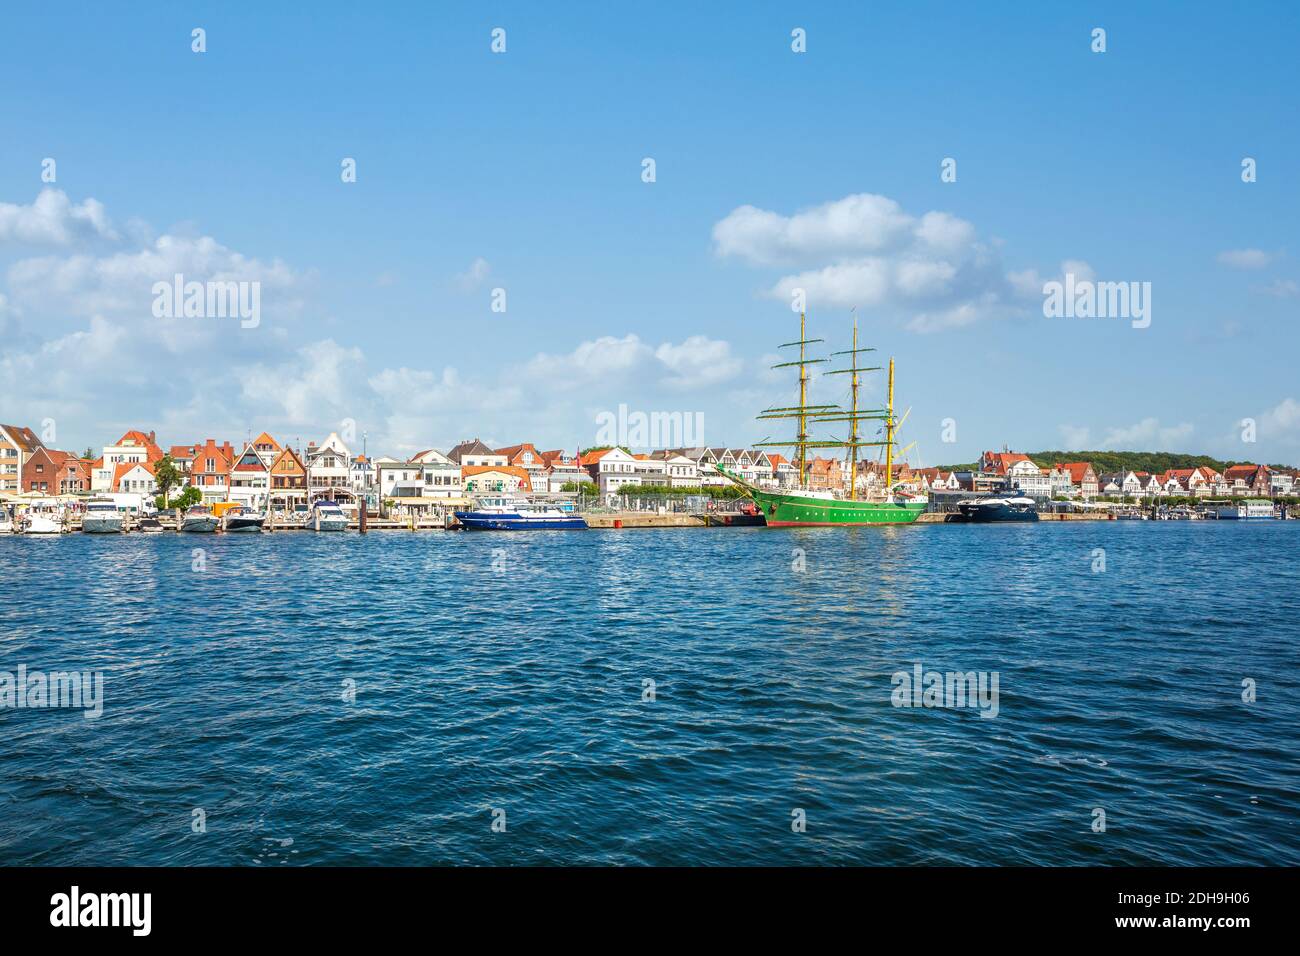 Boats in the harbor of Travemünde on a sunny summer day Stock Photo